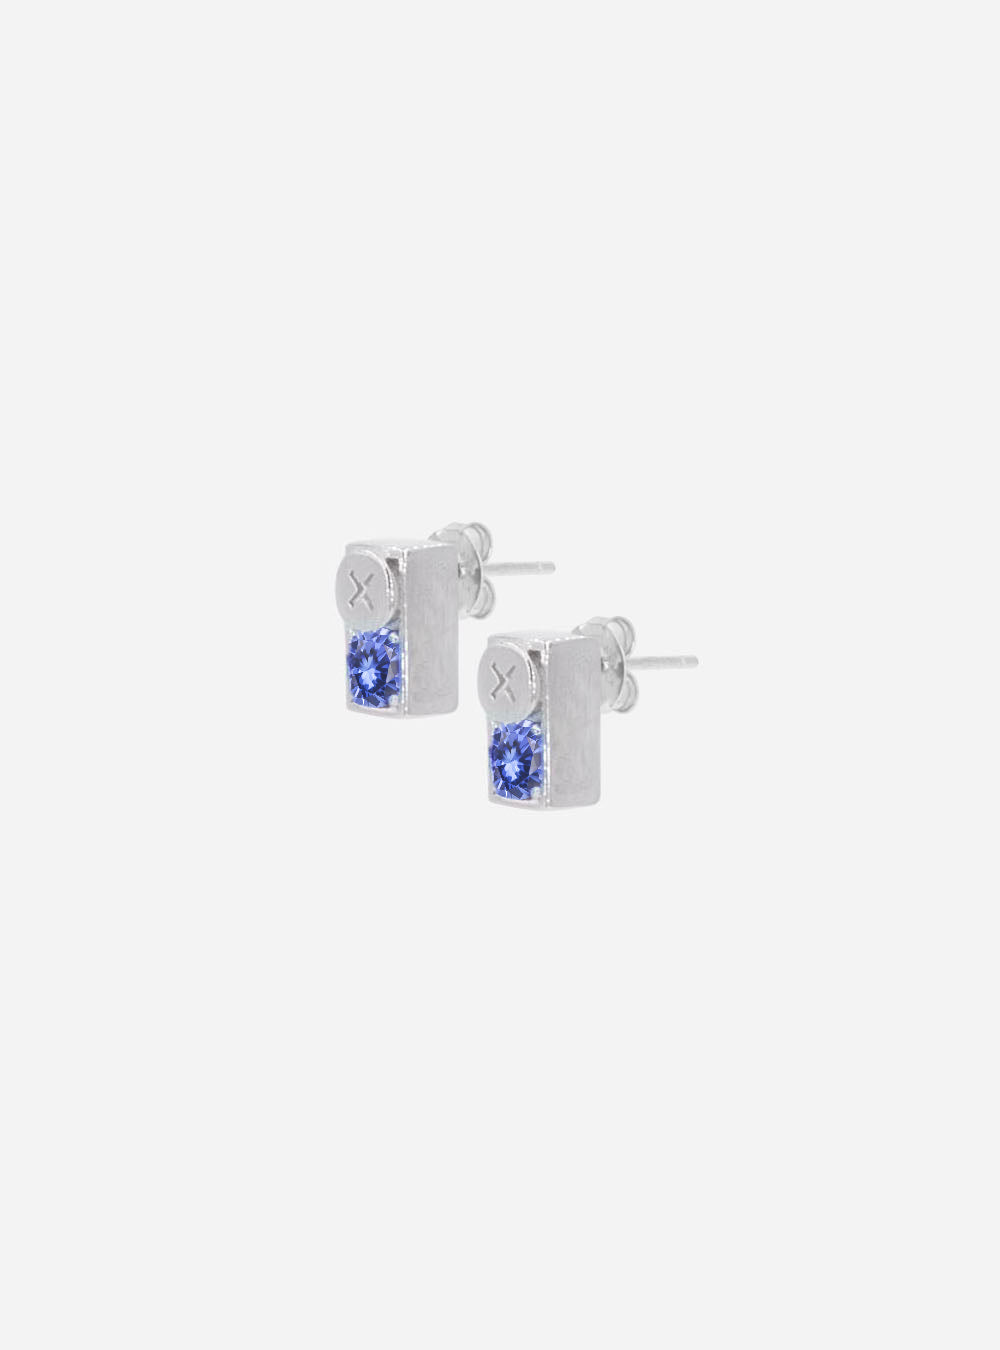 a pair of MIDNIGHTFACTORY Screwbox sapphire stud earrings on a white background.